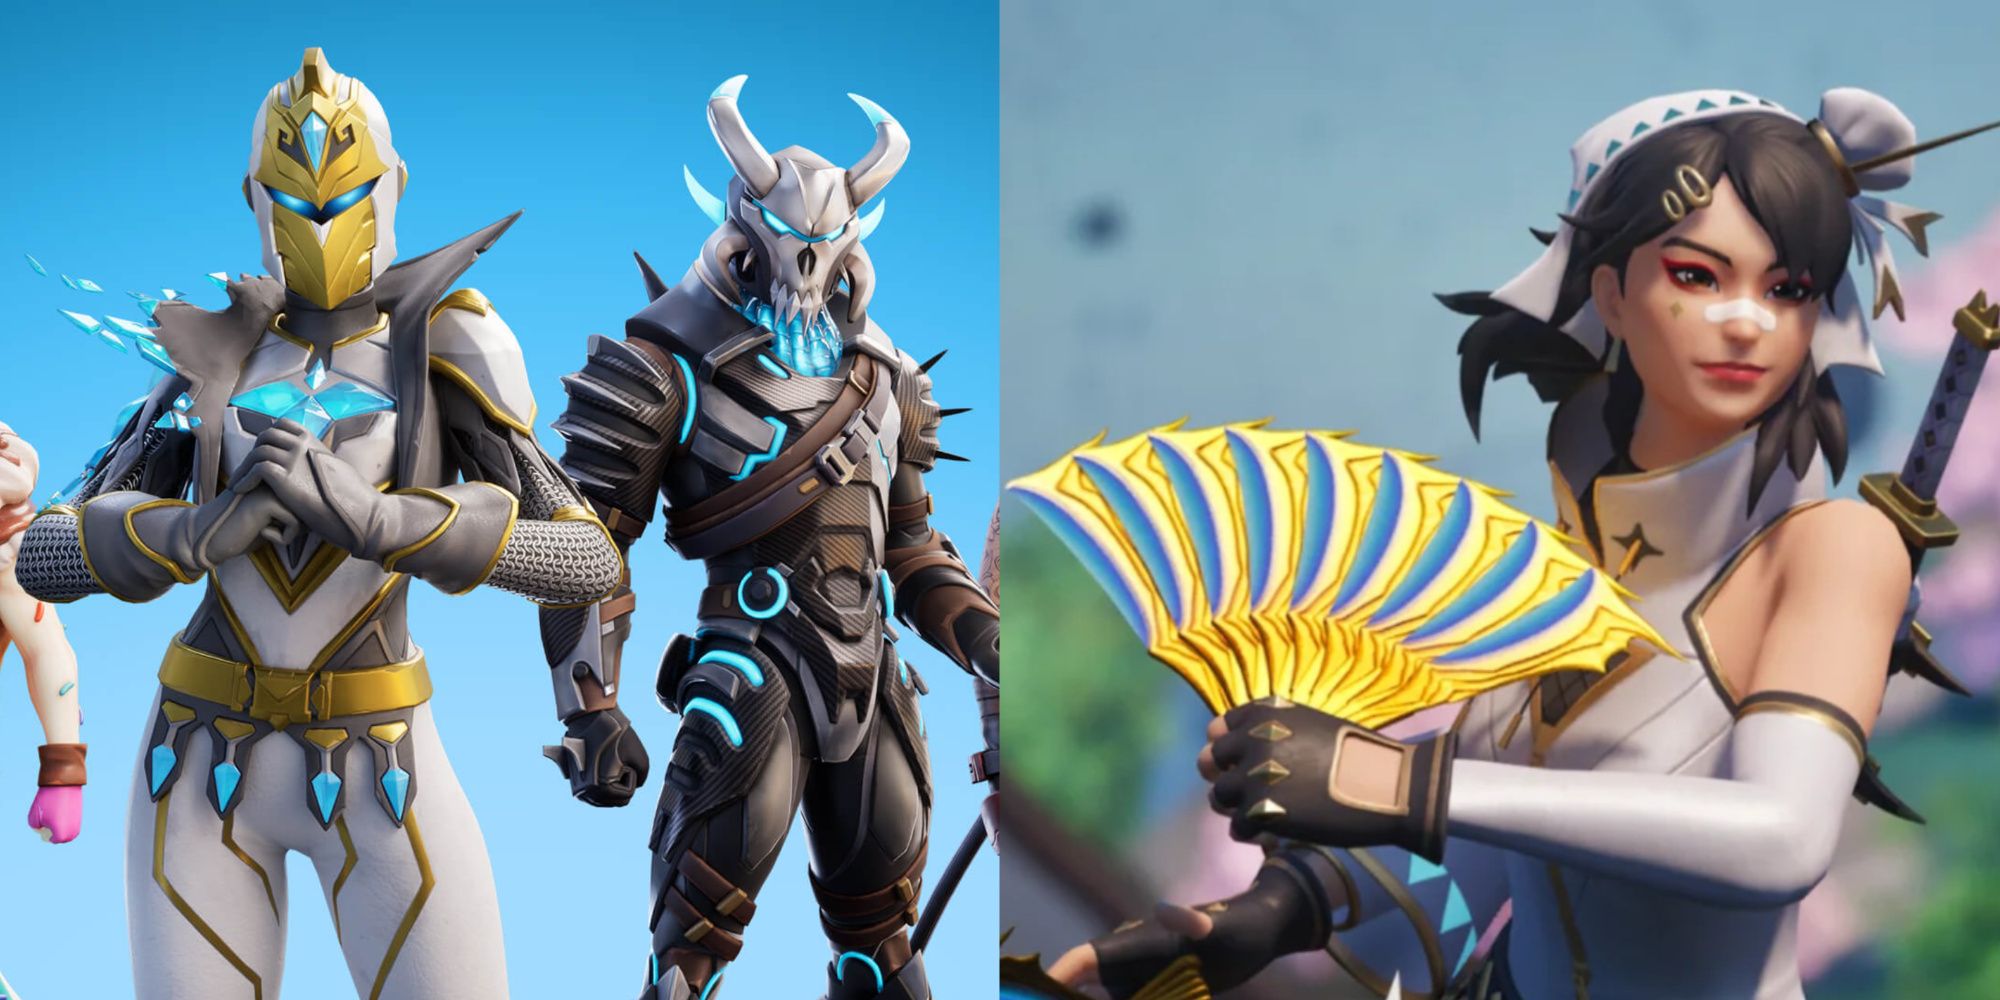 a split image from Fortnite that features two characters from the Fortnite OG battle pass, and Era holding the golden version of the Breaking Waves pickaxe.